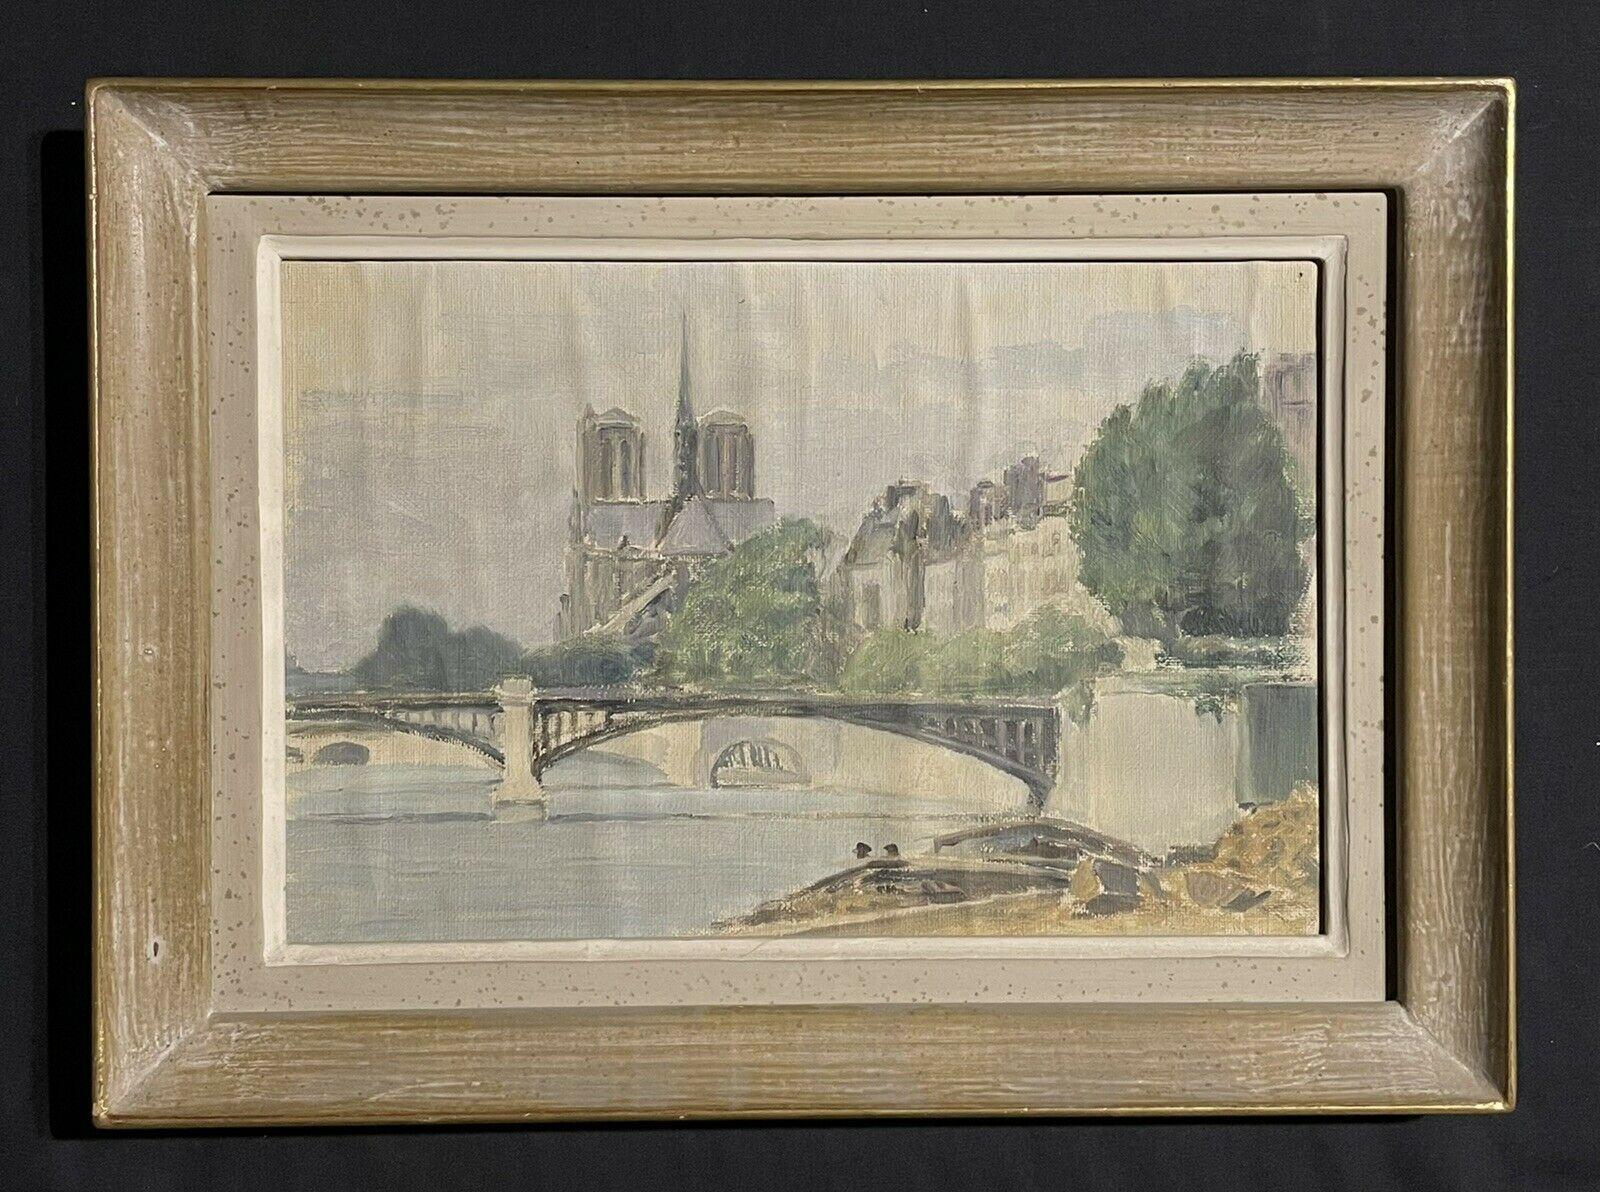 Artist/ School: French School, mid 20th century

Title: Notre Dame Paris, from the River Seine

Medium: oil painting on canvas laid to board. 

Measures: framed: 12 x 16.25 inches
painting: 8.75 x 13 inches

Provenance: private collection,